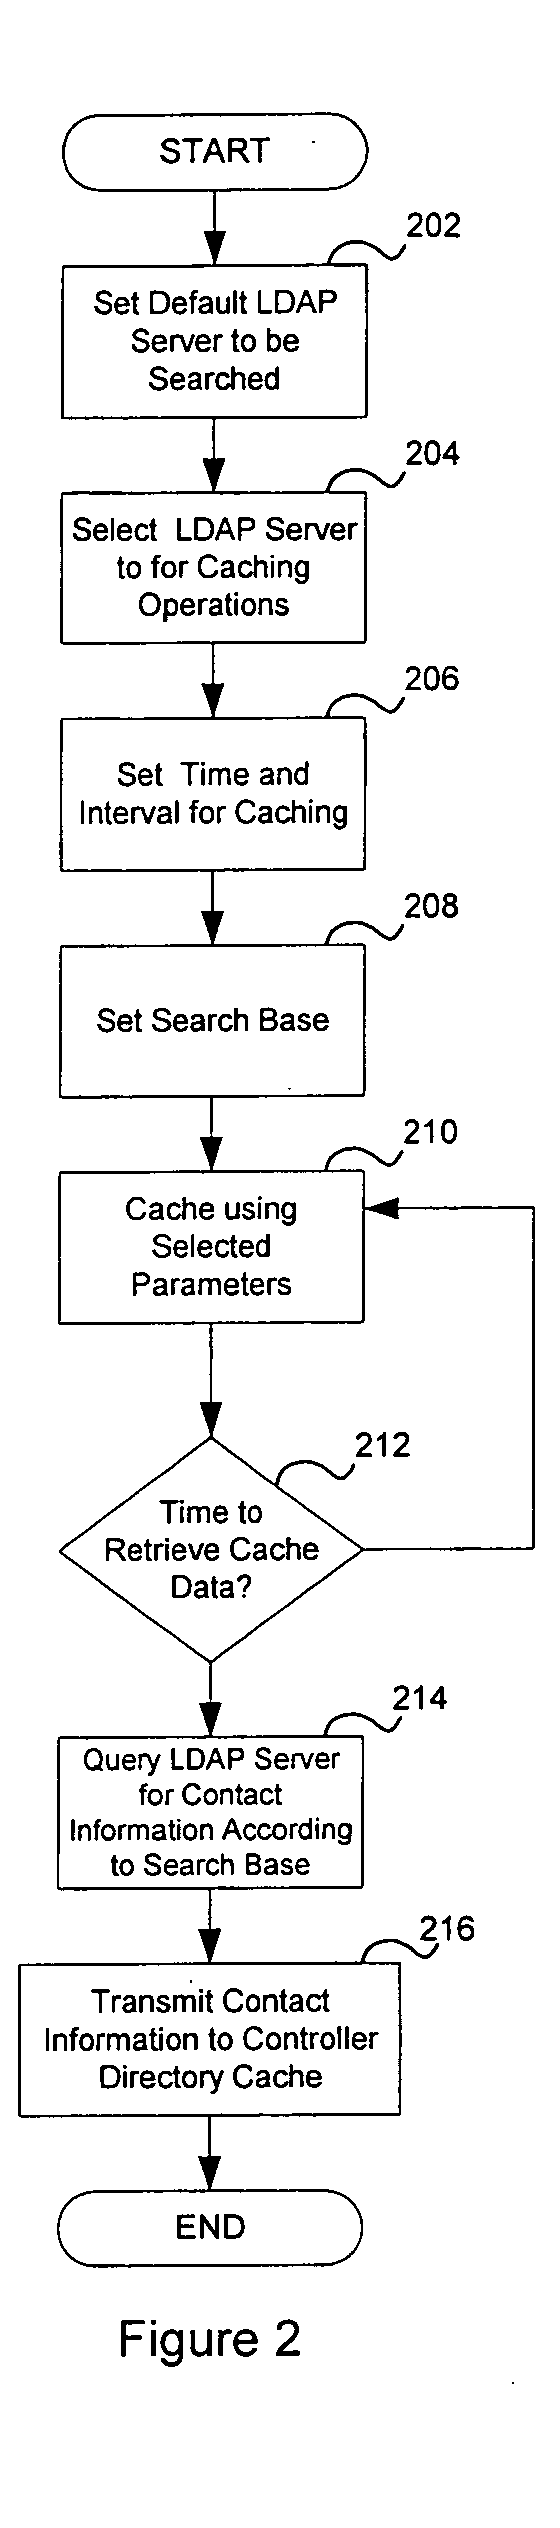 System and method for caching directory data in a networked computer environment